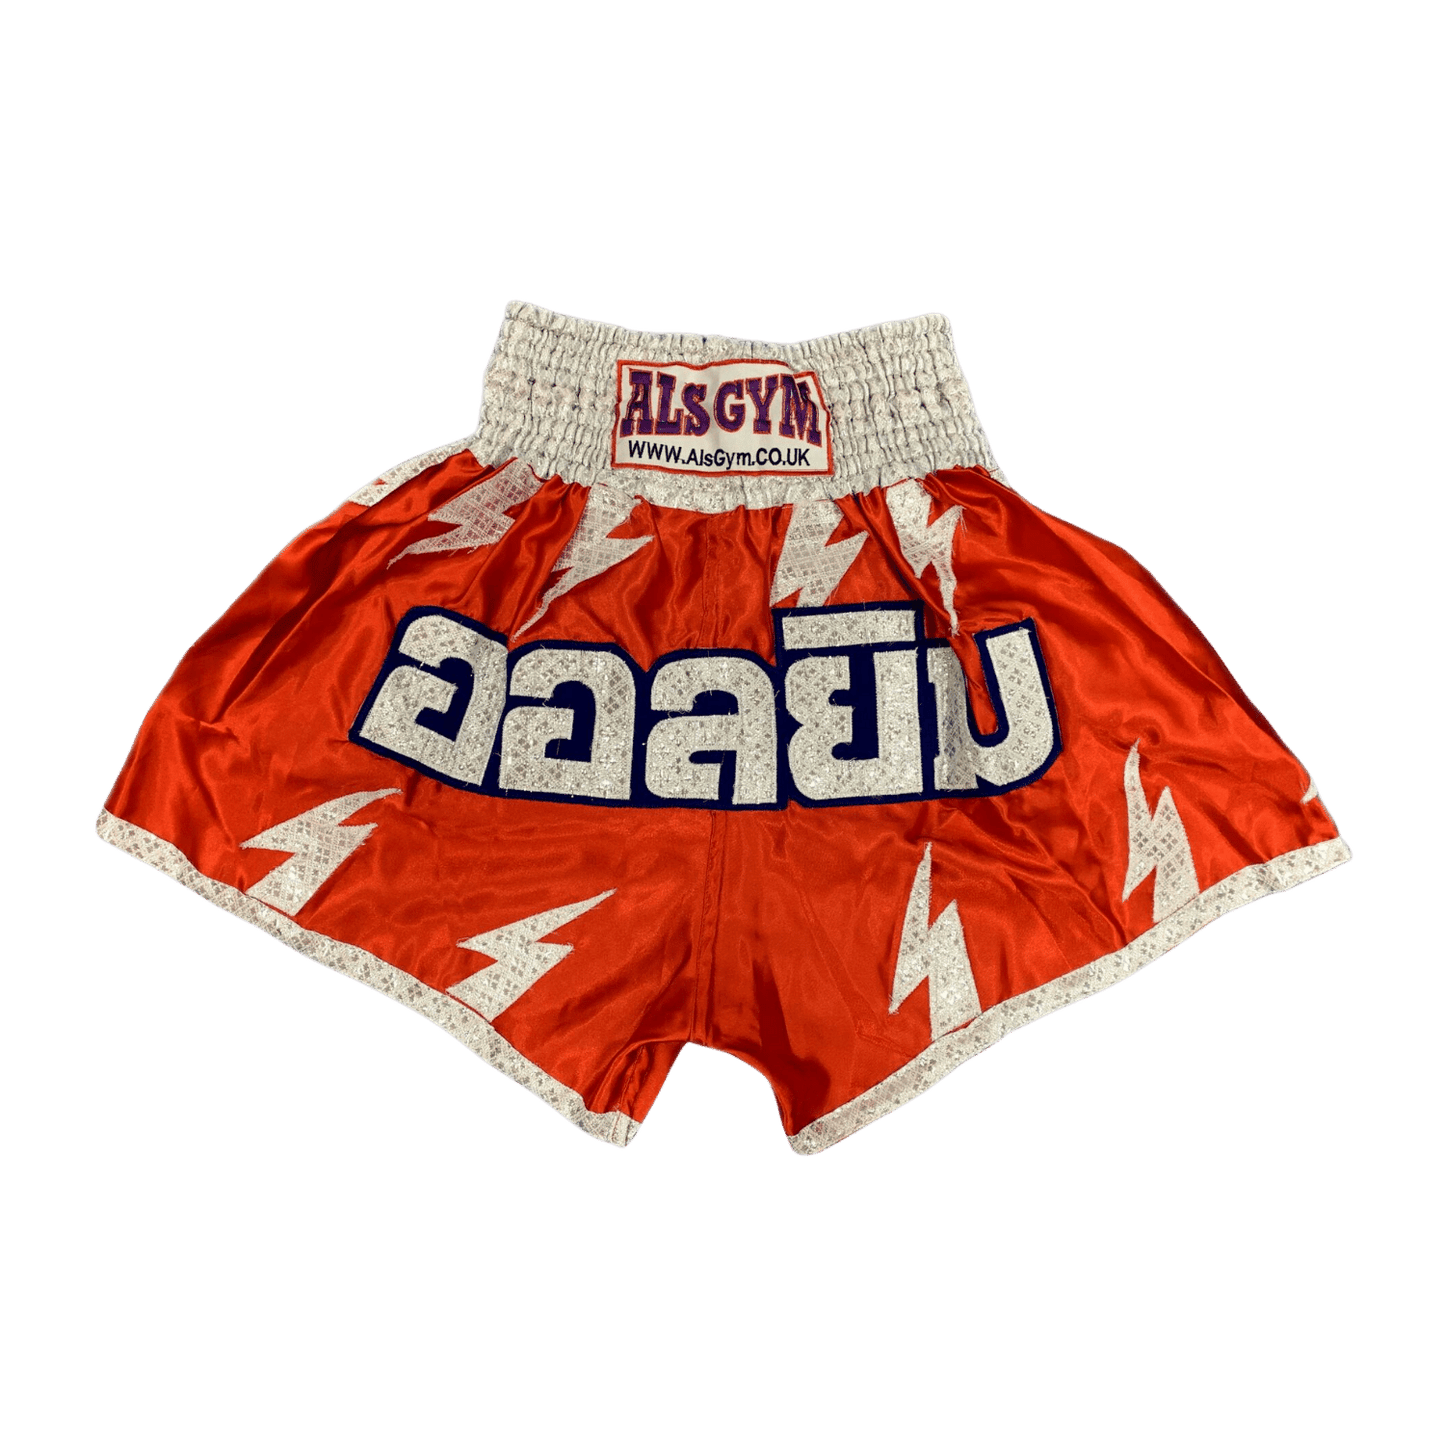 Hanuthai's Lightning Glitter Muay Thai Boxing Shorts feature a glittery lightning bolt pattern on a pair of orange and white shorts, combining style and performance.